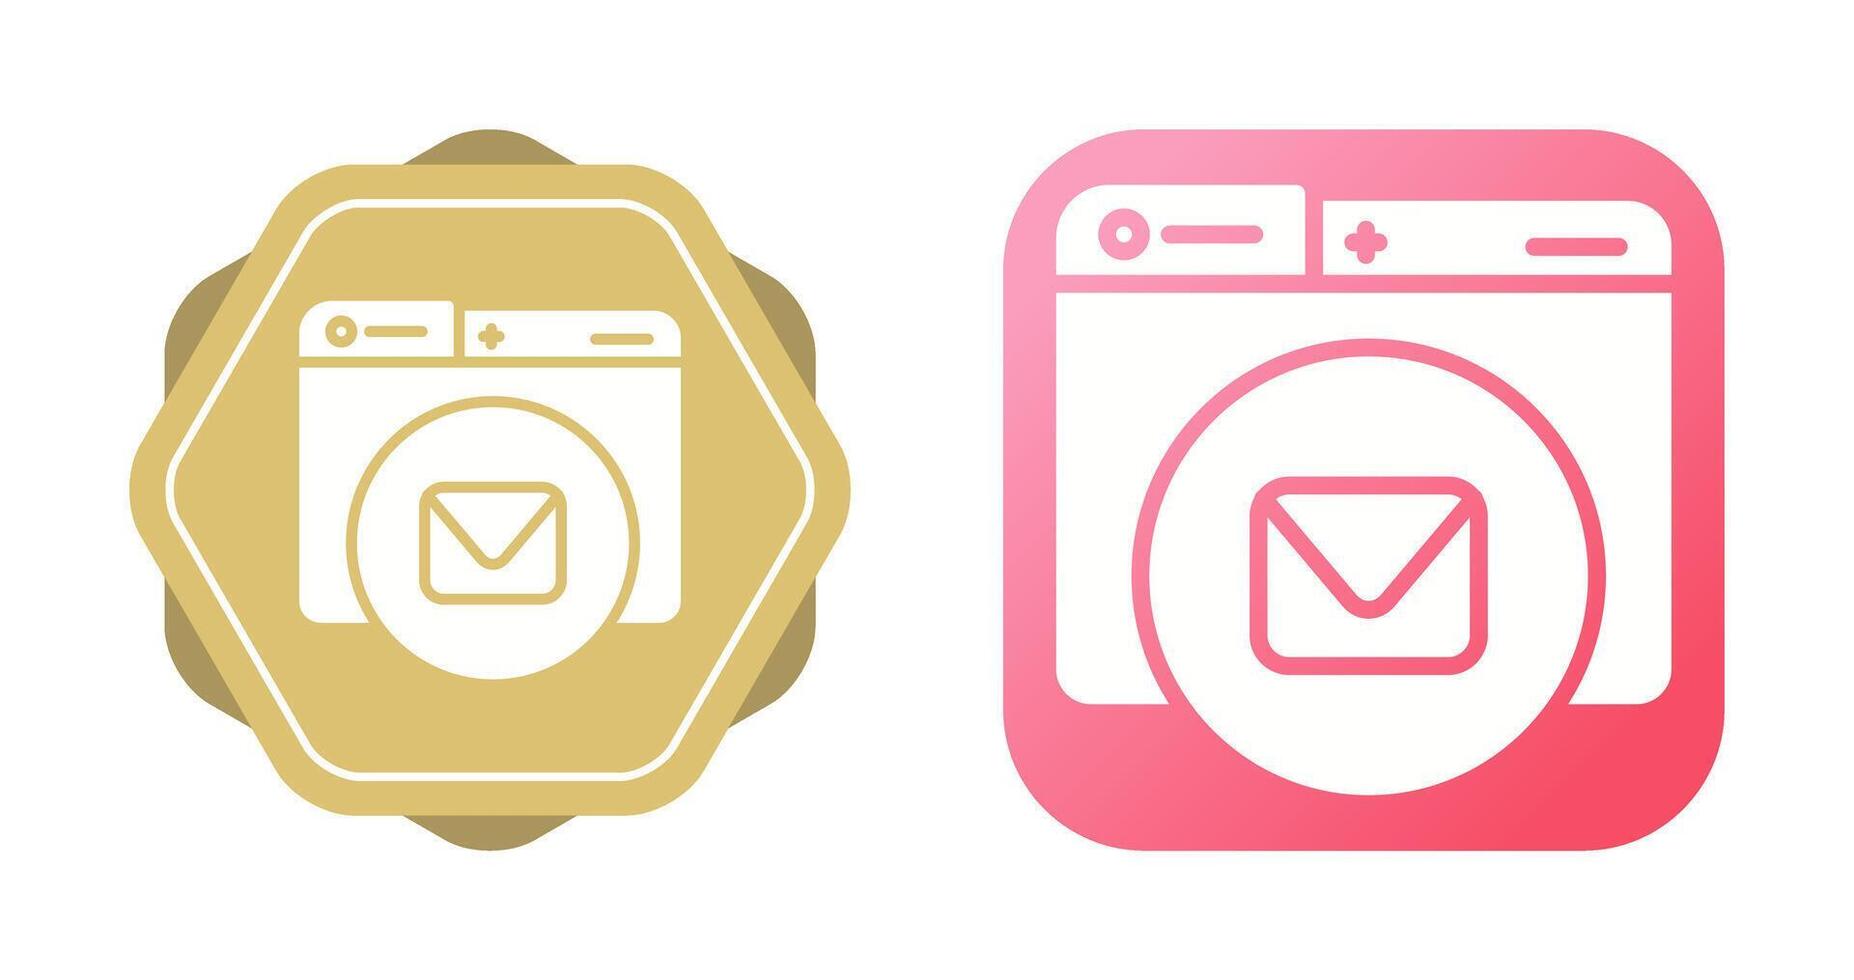 Contact Mail Vector Icon